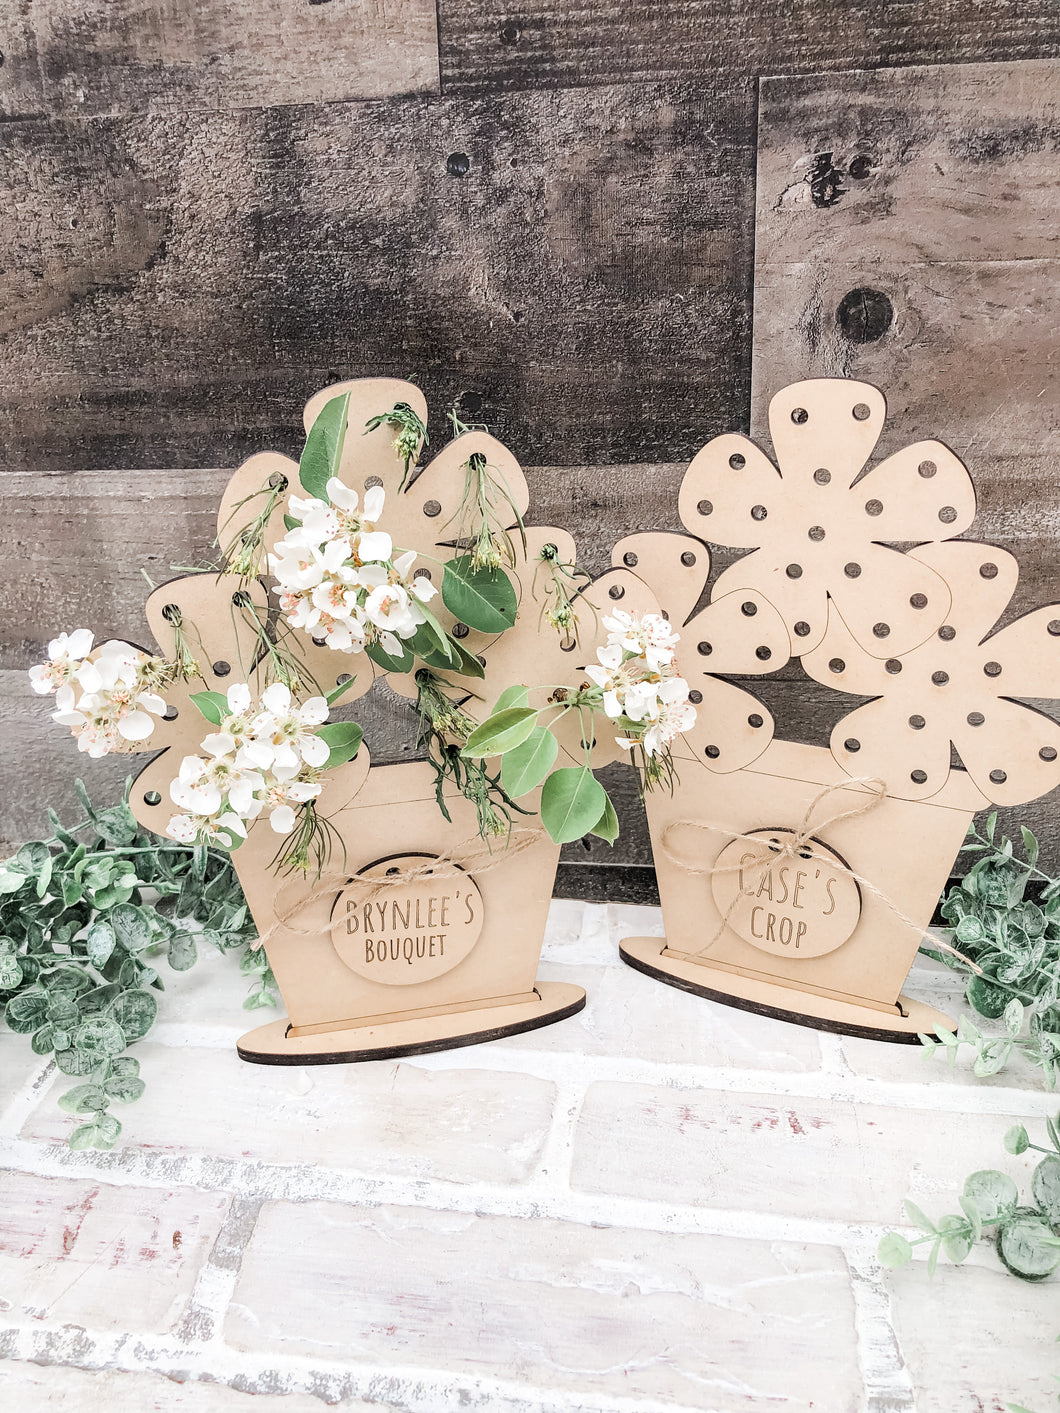 Flower Picking Display for Kids - Mother’s Day Gift